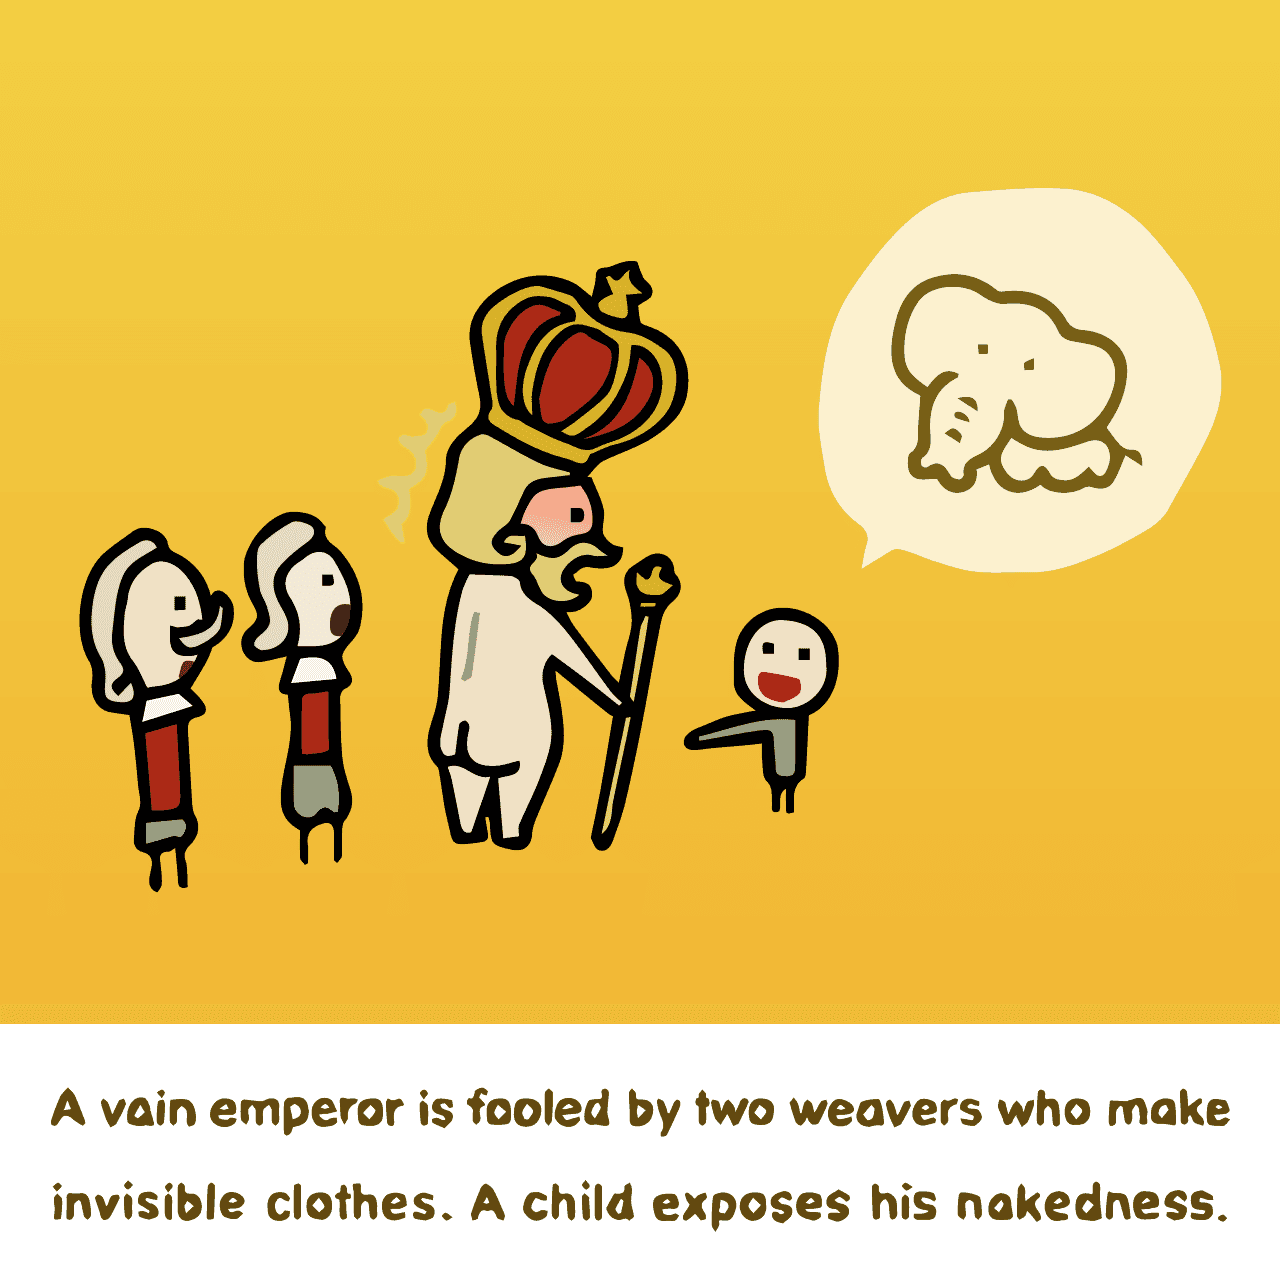 Hans Christian Andersen "The Emperor's New Clothes : A vain emperor is fooled by two weavers who make invisible clothes. A child exposes his nakedness."